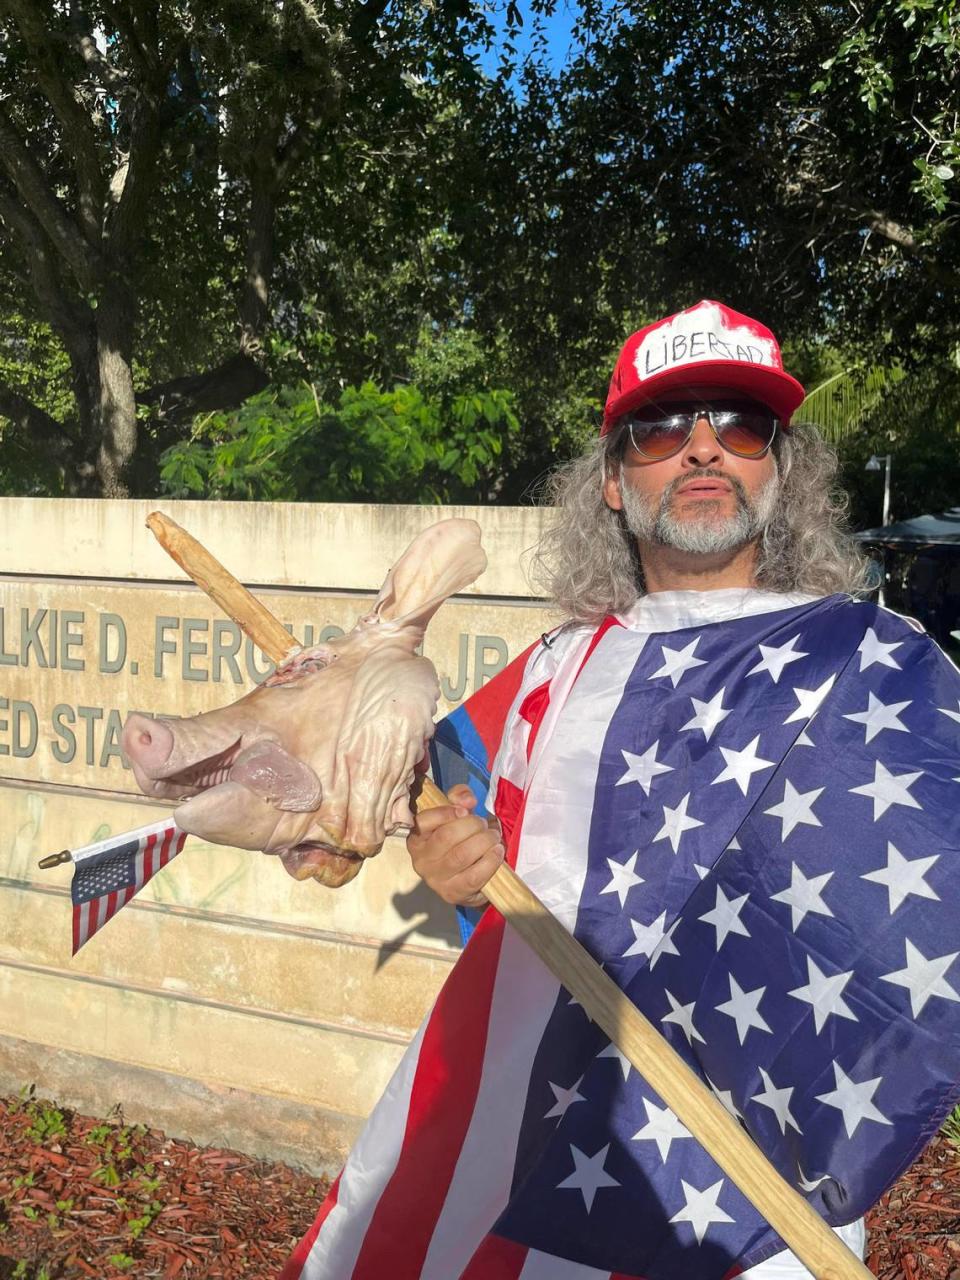 Osmani Estrada, 40, poses with a severed pig head outside the federal courthouse in Miami on Tuesday, June 13, 2023. He said he’s there to show support for the democratic process working as it should.